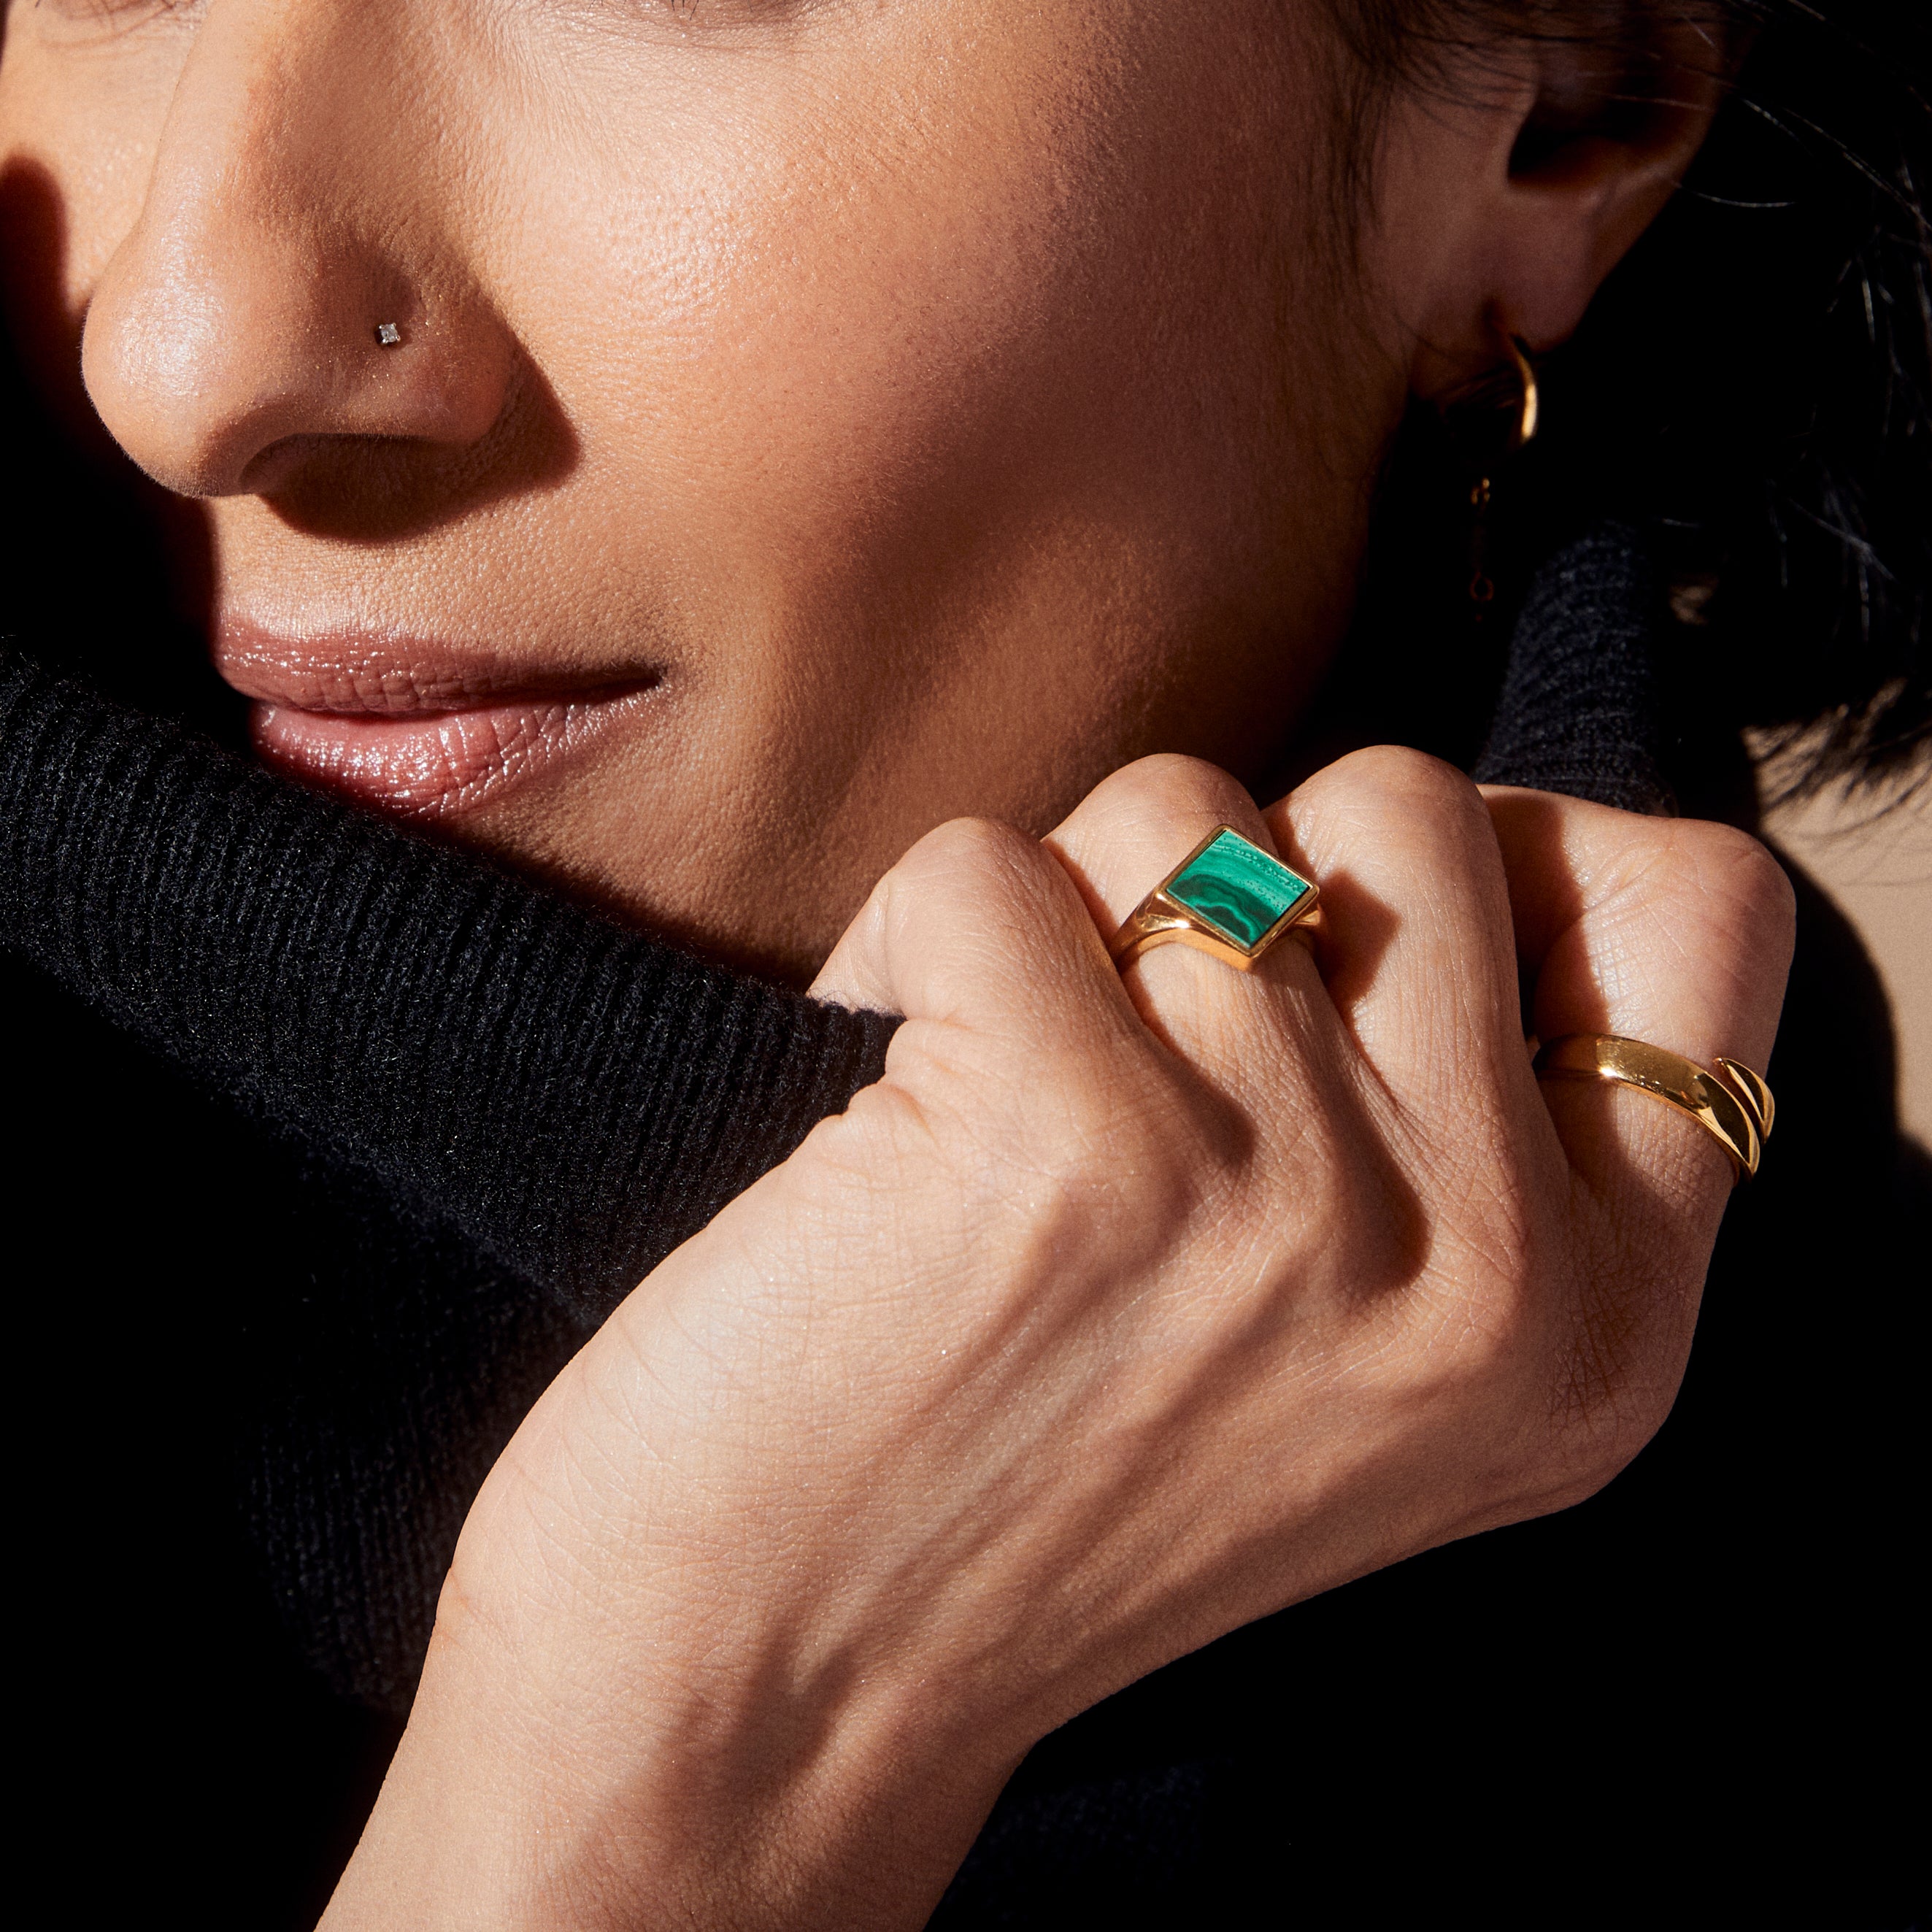 Anita Rani goes super glam for new jewellery campaign - shop the